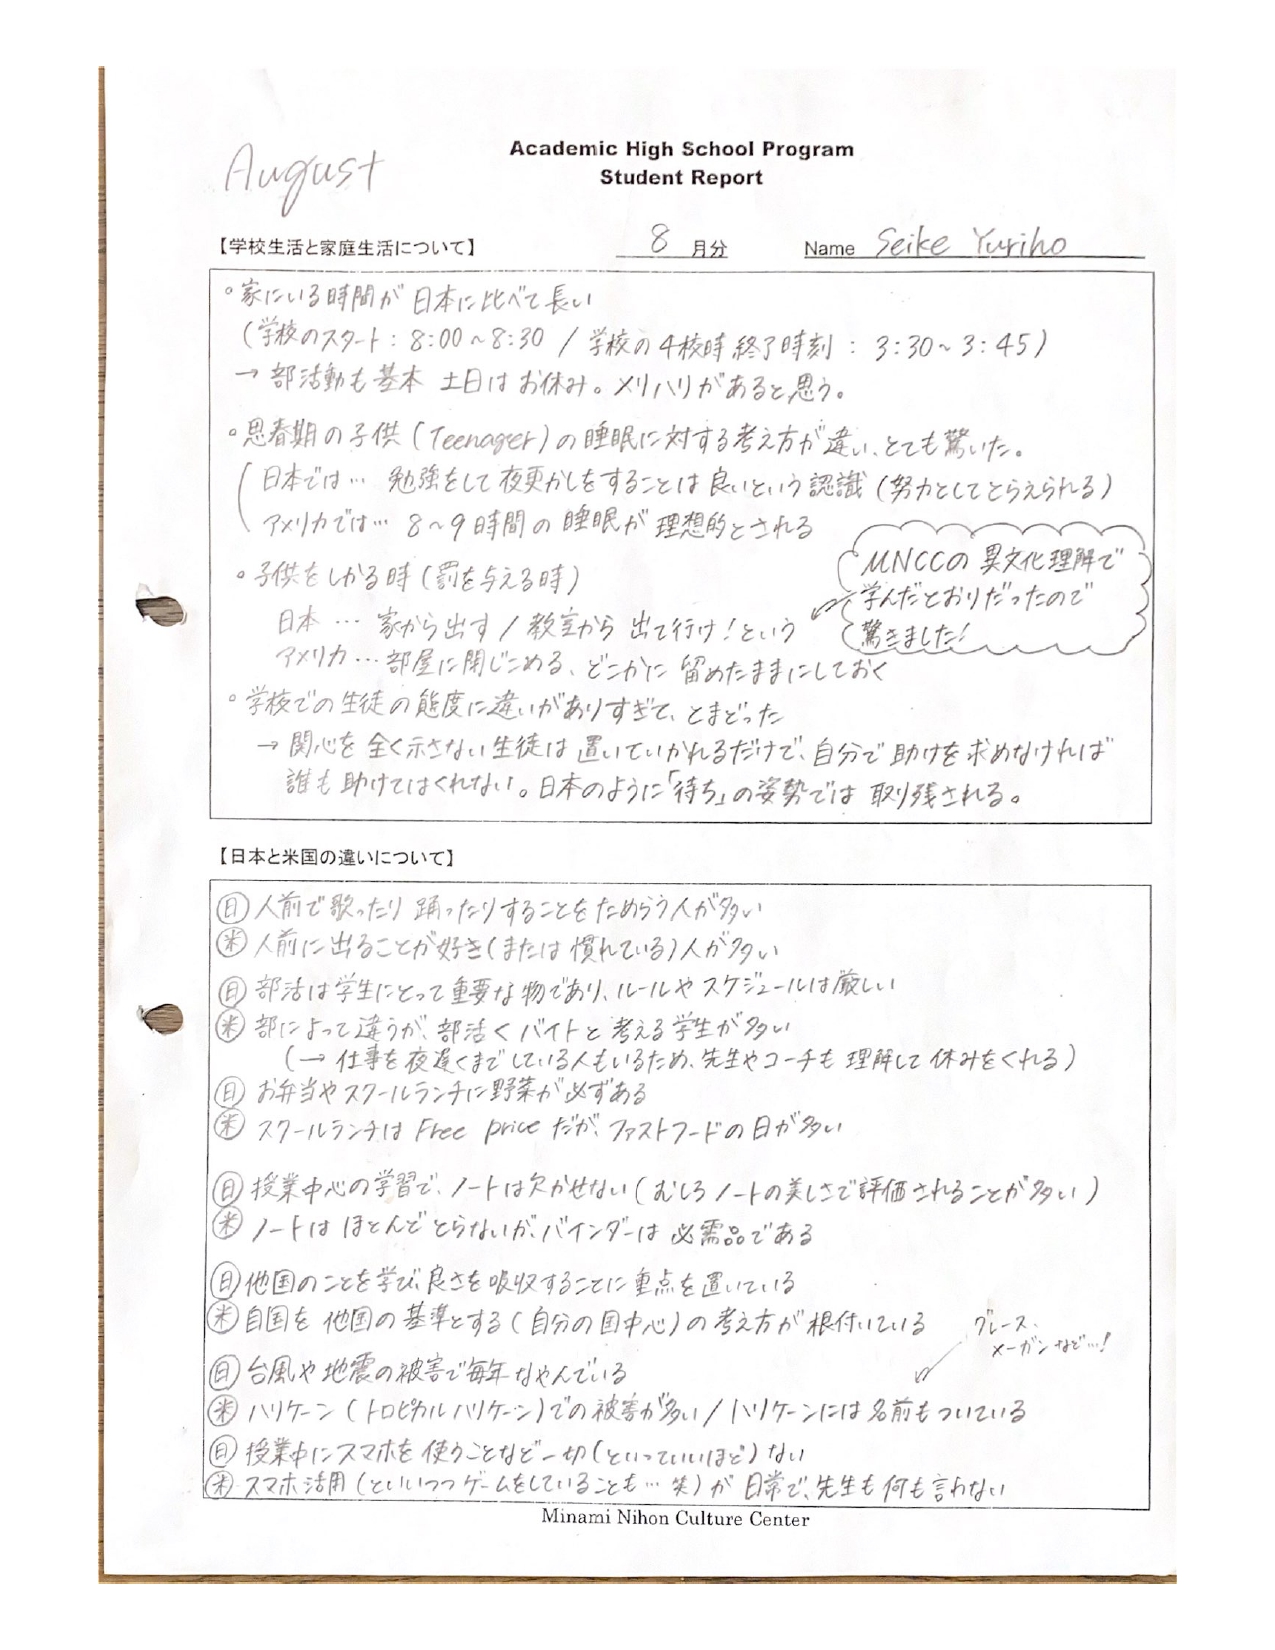 Yuriho's Student Report in August